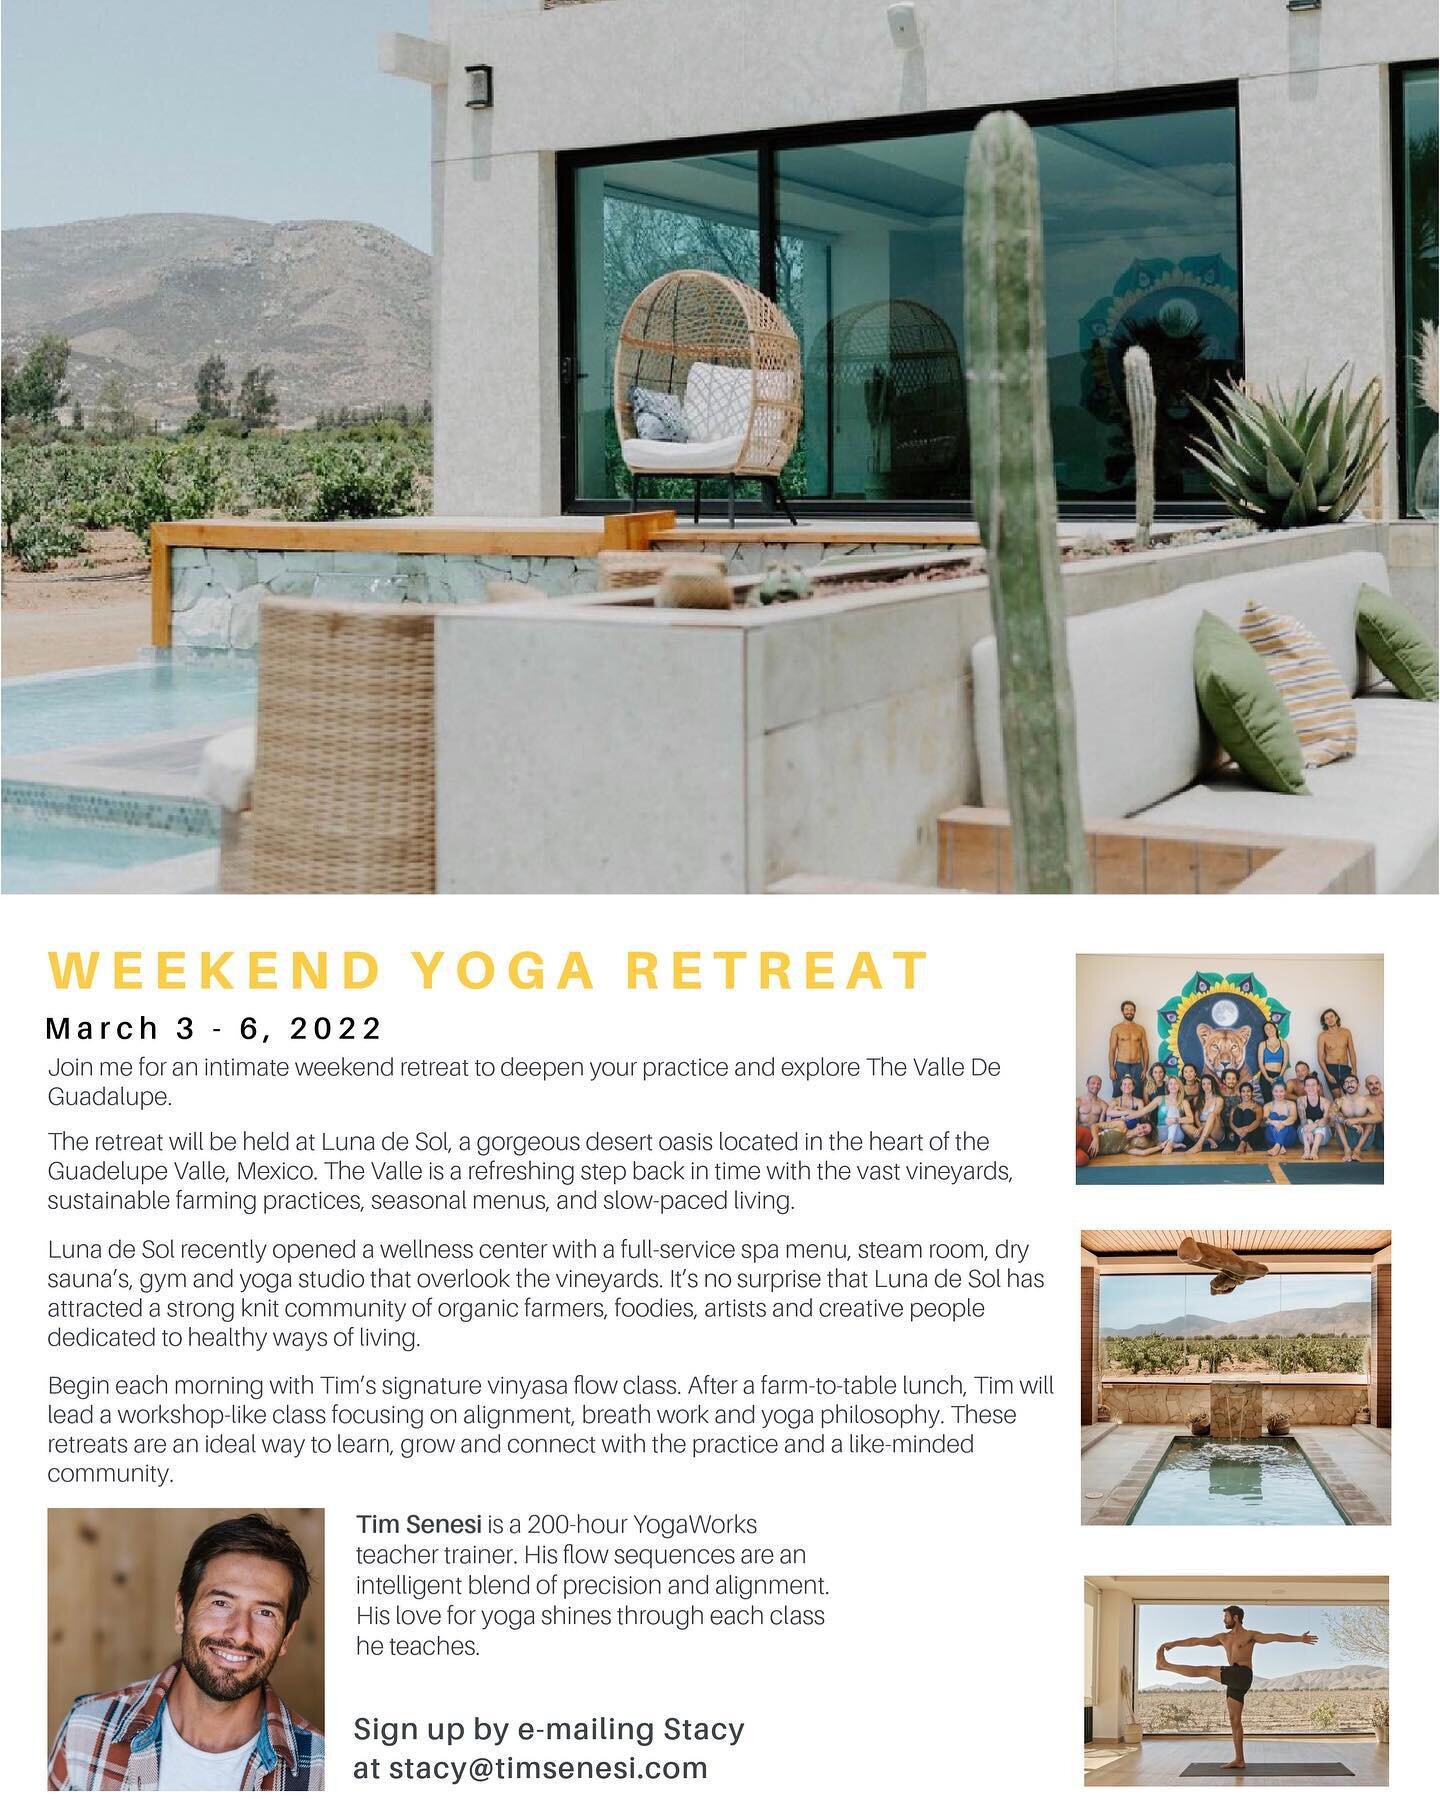 I have a retreat coming up March 3-6 at my home away from home @luna_desol I hope you can join :)
Email Stacy@timsenesi.com for more information and to sign up.